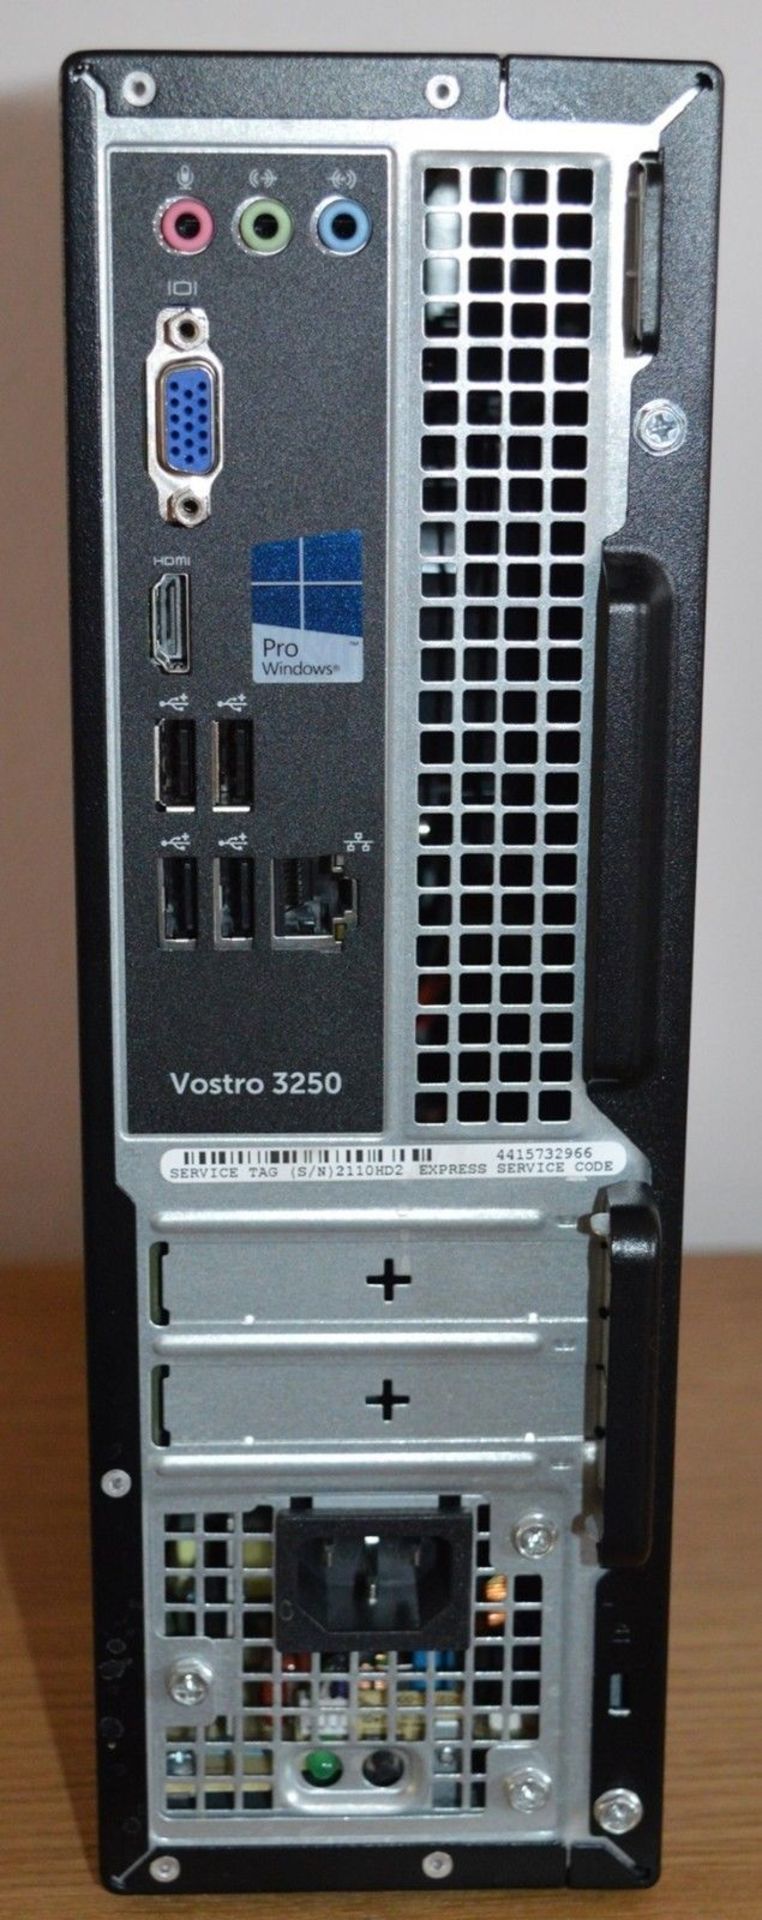 1 x Dell Vostro 3250 Small Form Factor PC - Features Intel Skylake G4400 3.4ghz Processor, 8gb - Image 3 of 5